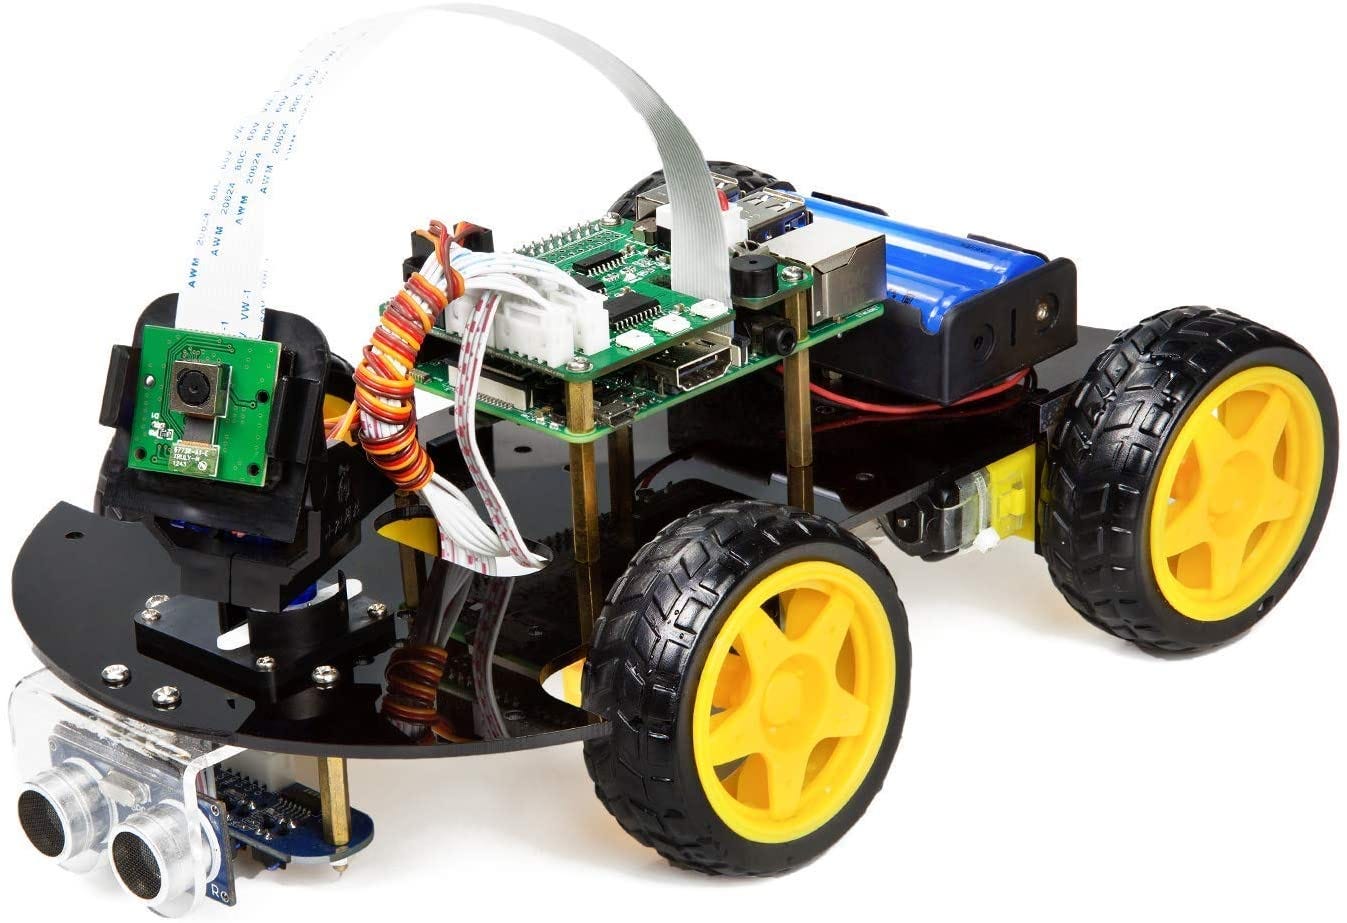 Raspberry PI Robot Car Controlled by Node.js | by Walter Martins | The  Startup | Medium